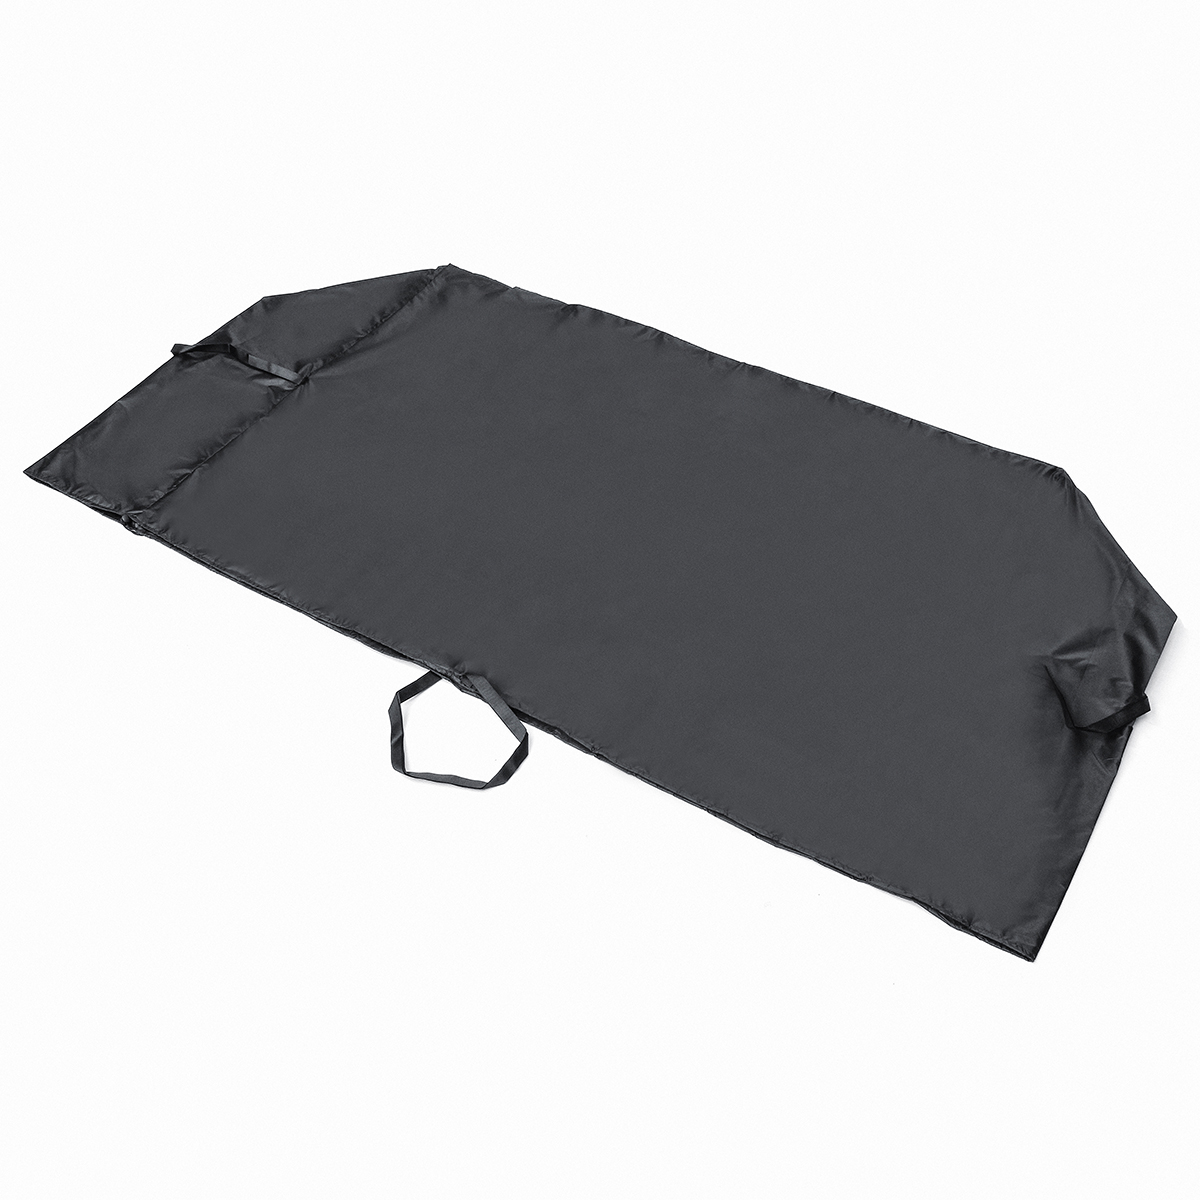 1422x558x1016-cm-BBQ-Grill-Cover-Waterproof-Anti-dust-Gas-Charcoal-Barbecue-Protector-Outdoor-Campin-1711679-6